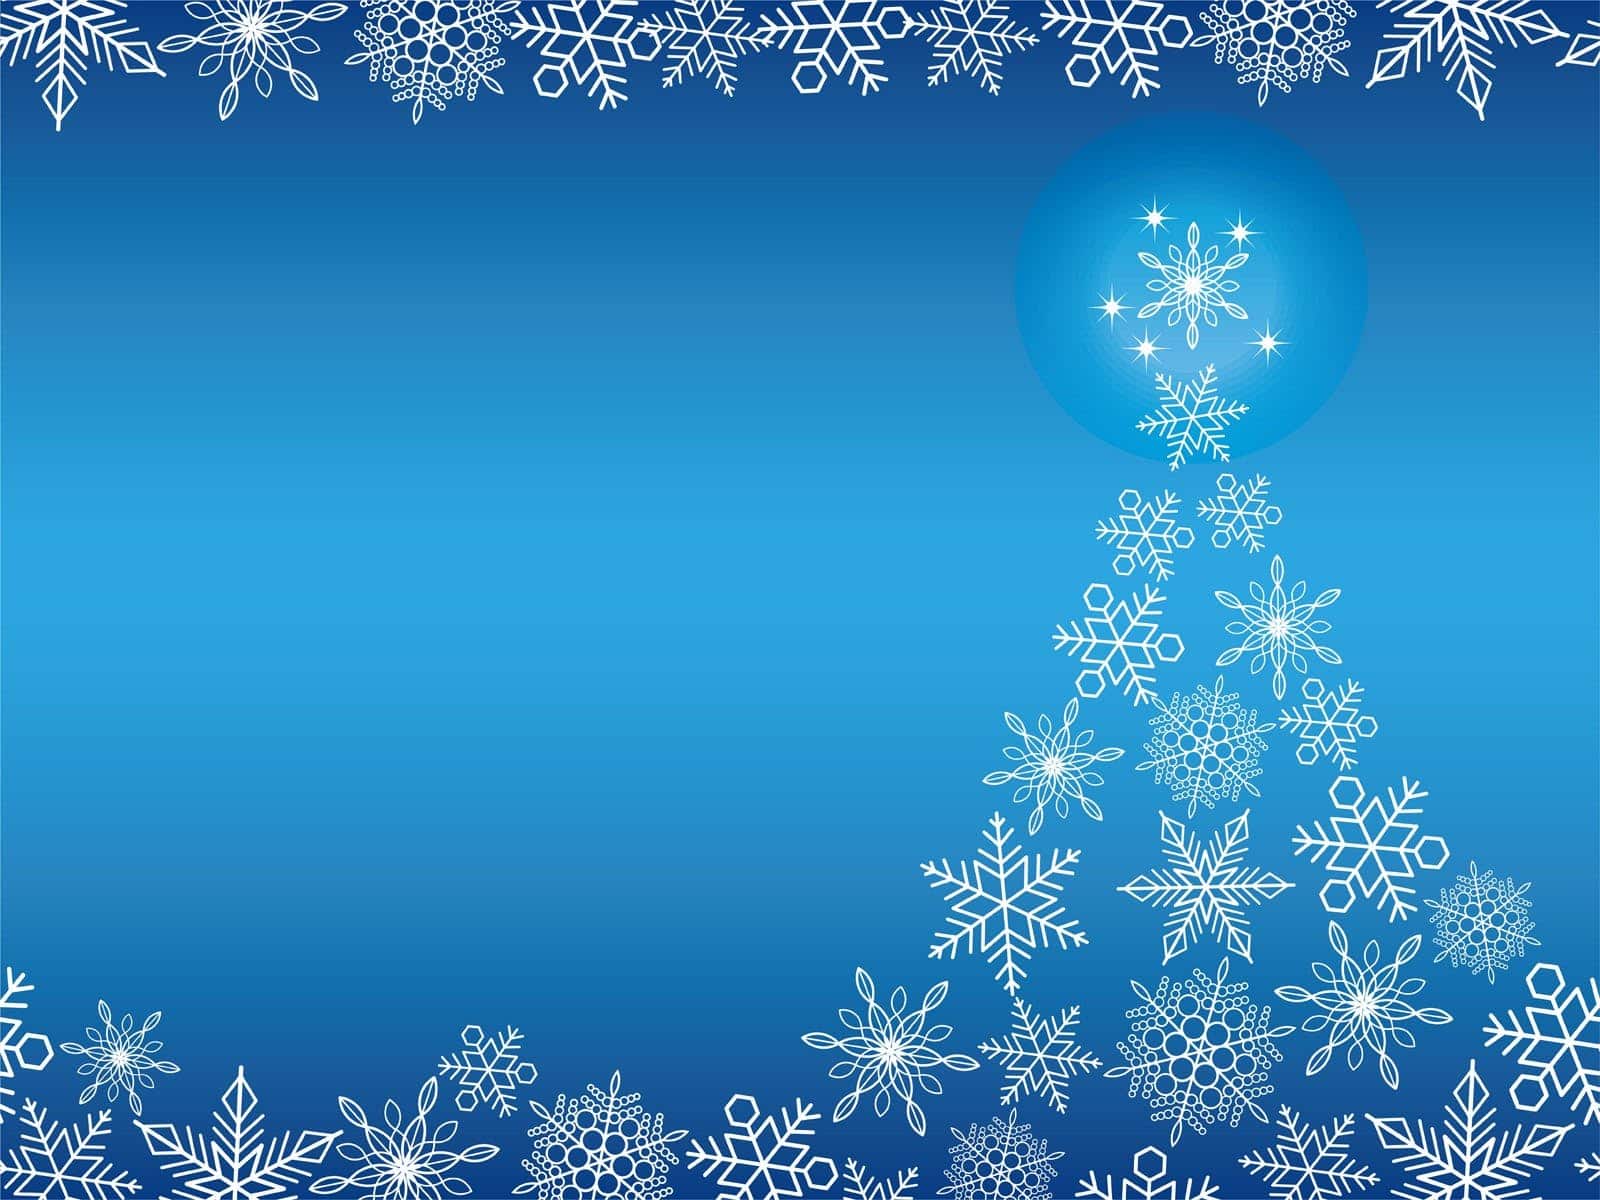 Blue background with white Christmas tree on right